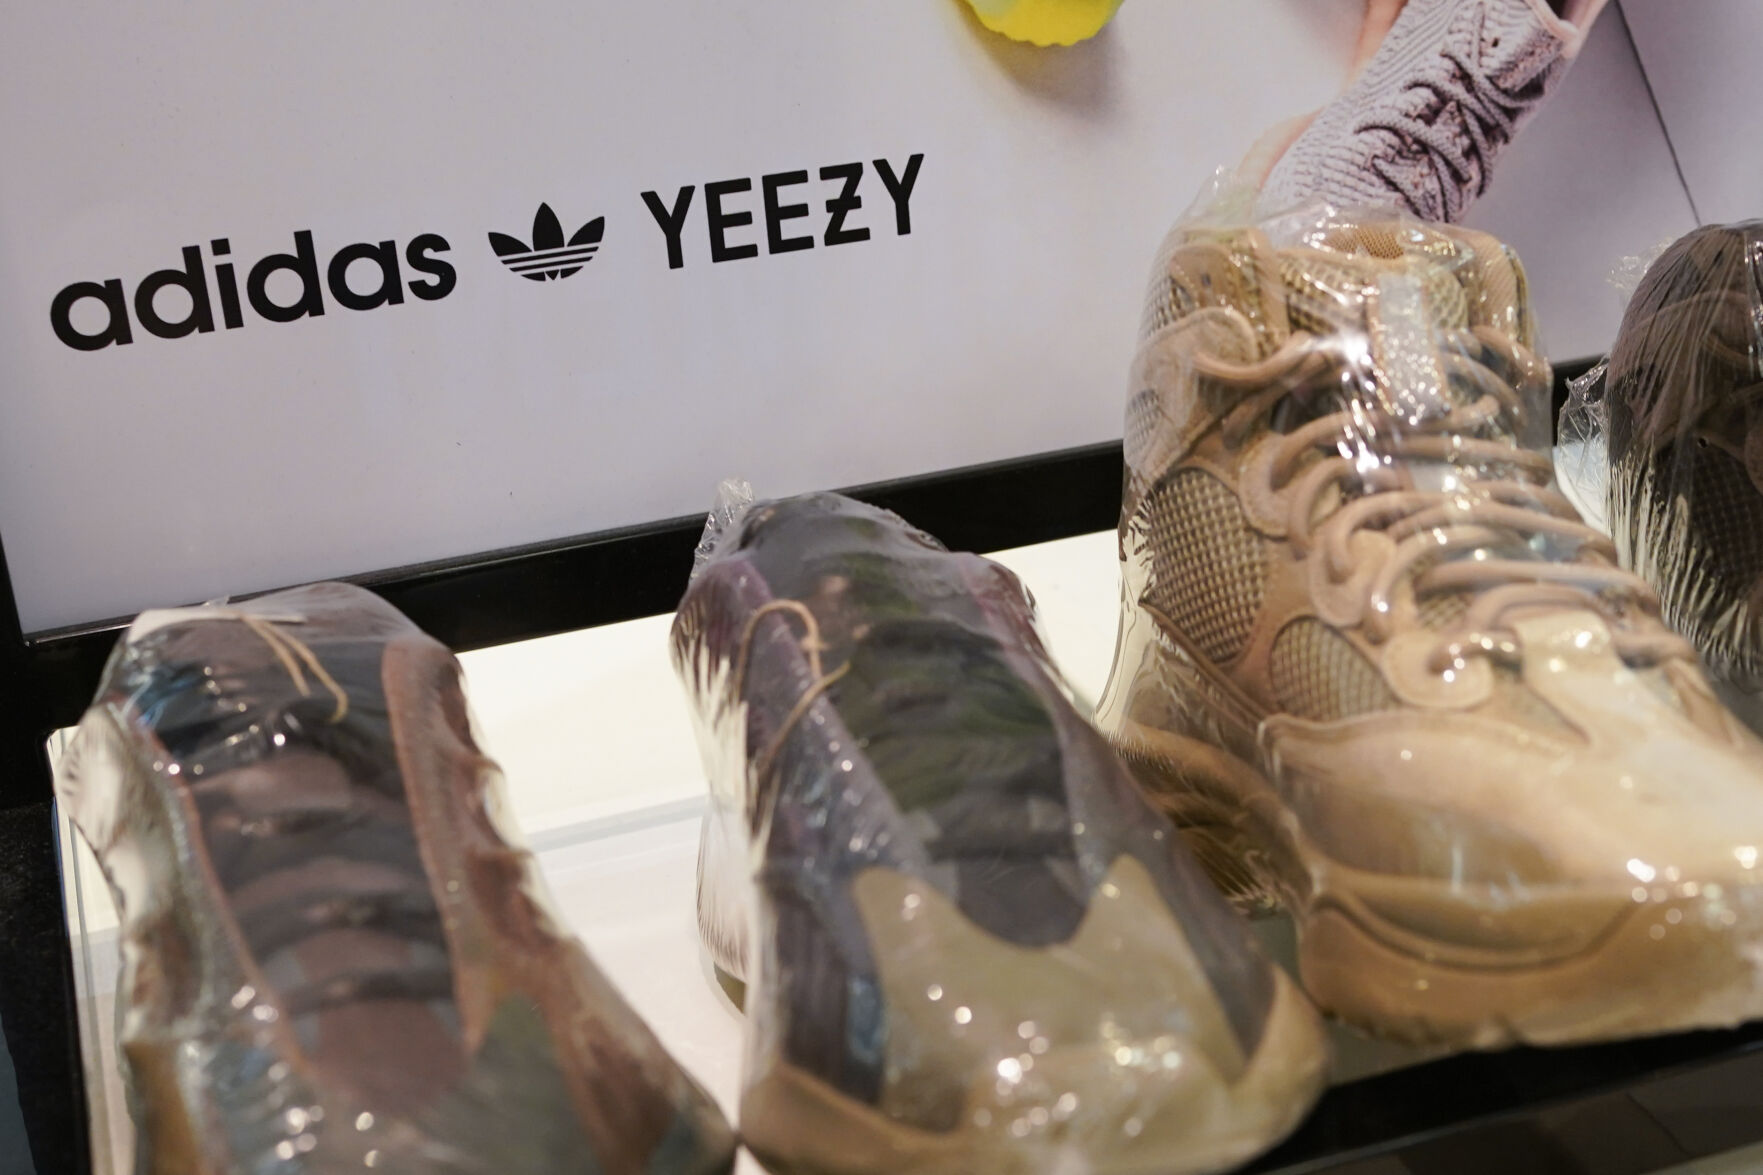 <p>A sign advertises Yeezy shoes made by Adidas at Kickclusive, a sneaker resale store, in Paramus, N.J., Tuesday, Oct. 25, 2022. Adidas has ended its partnership with the rapper formerly known as Kanye West over his offensive and antisemitic remarks, the latest company to cut ties with Ye and a decision that the German sportswear company said would hit its bottom line. (AP Photo/Seth Wenig)</p>   PHOTO CREDIT: Seth Wenig - staff, AP